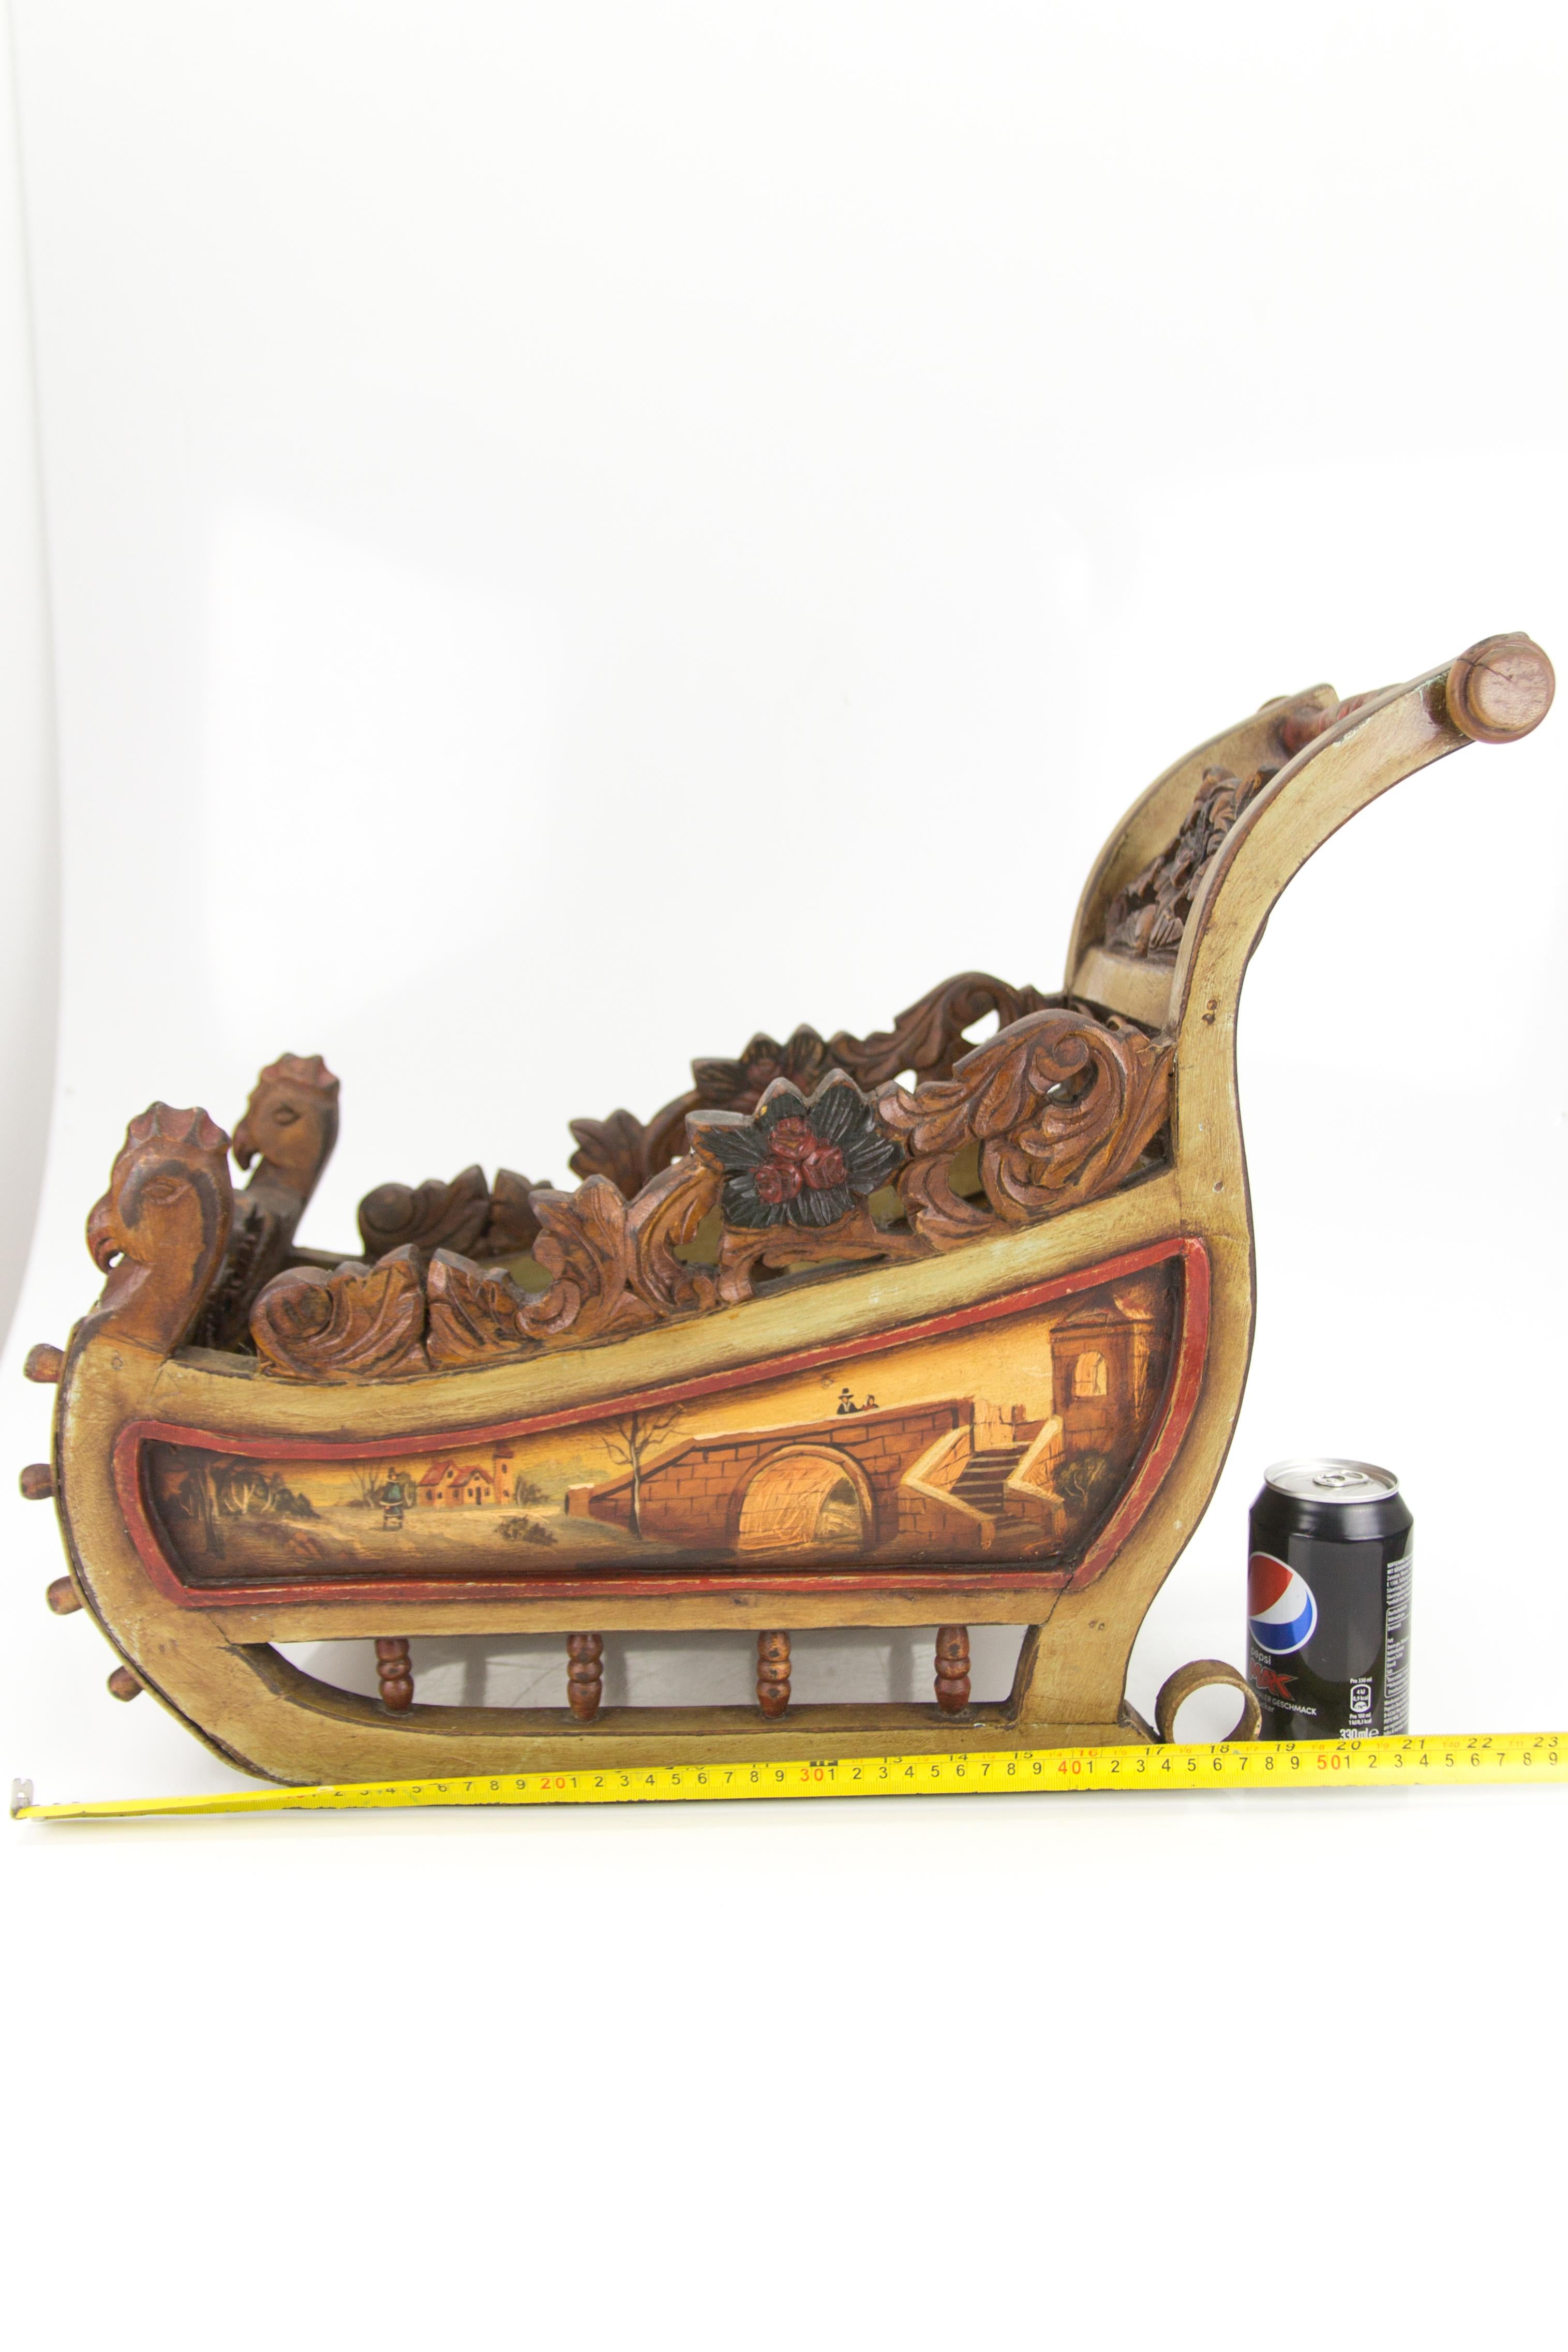 Old German Carved Wooden Sleigh with Hand Painted Scenes 11